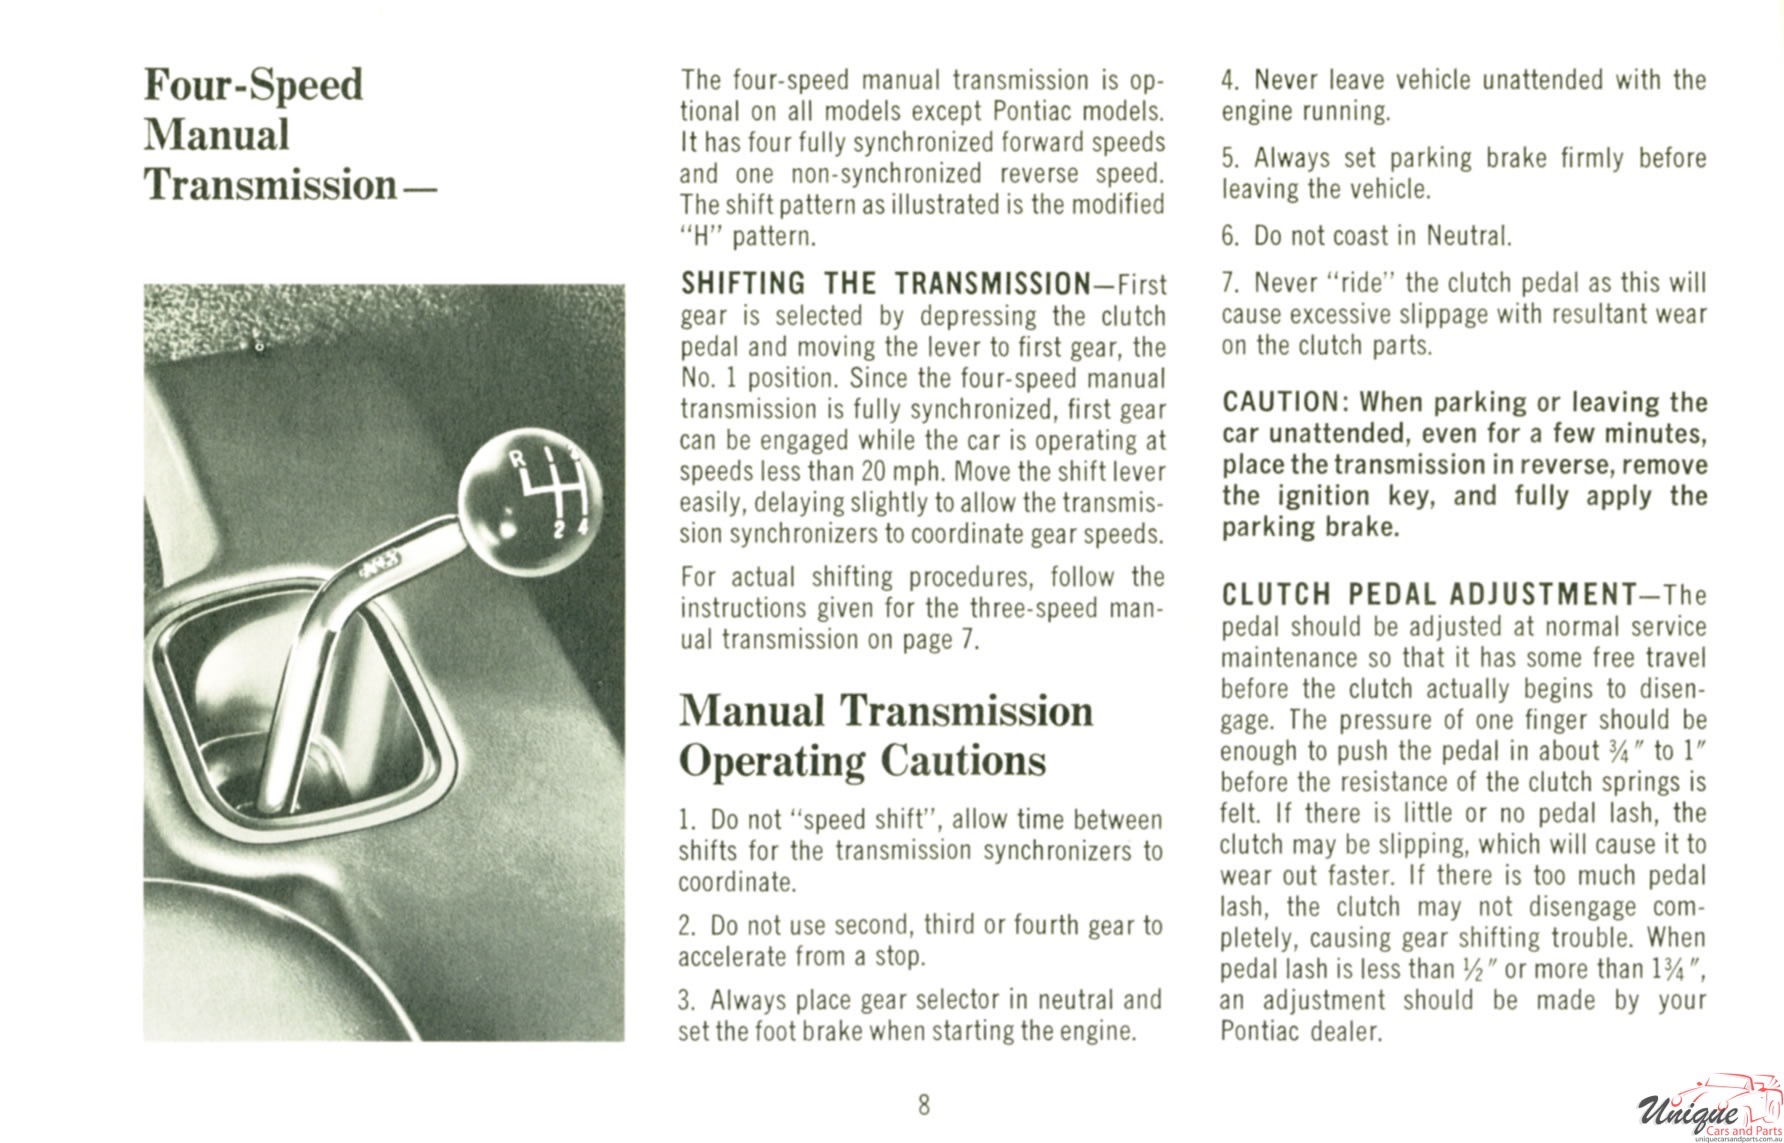 1969 Pontiac Owners Manual Page 23